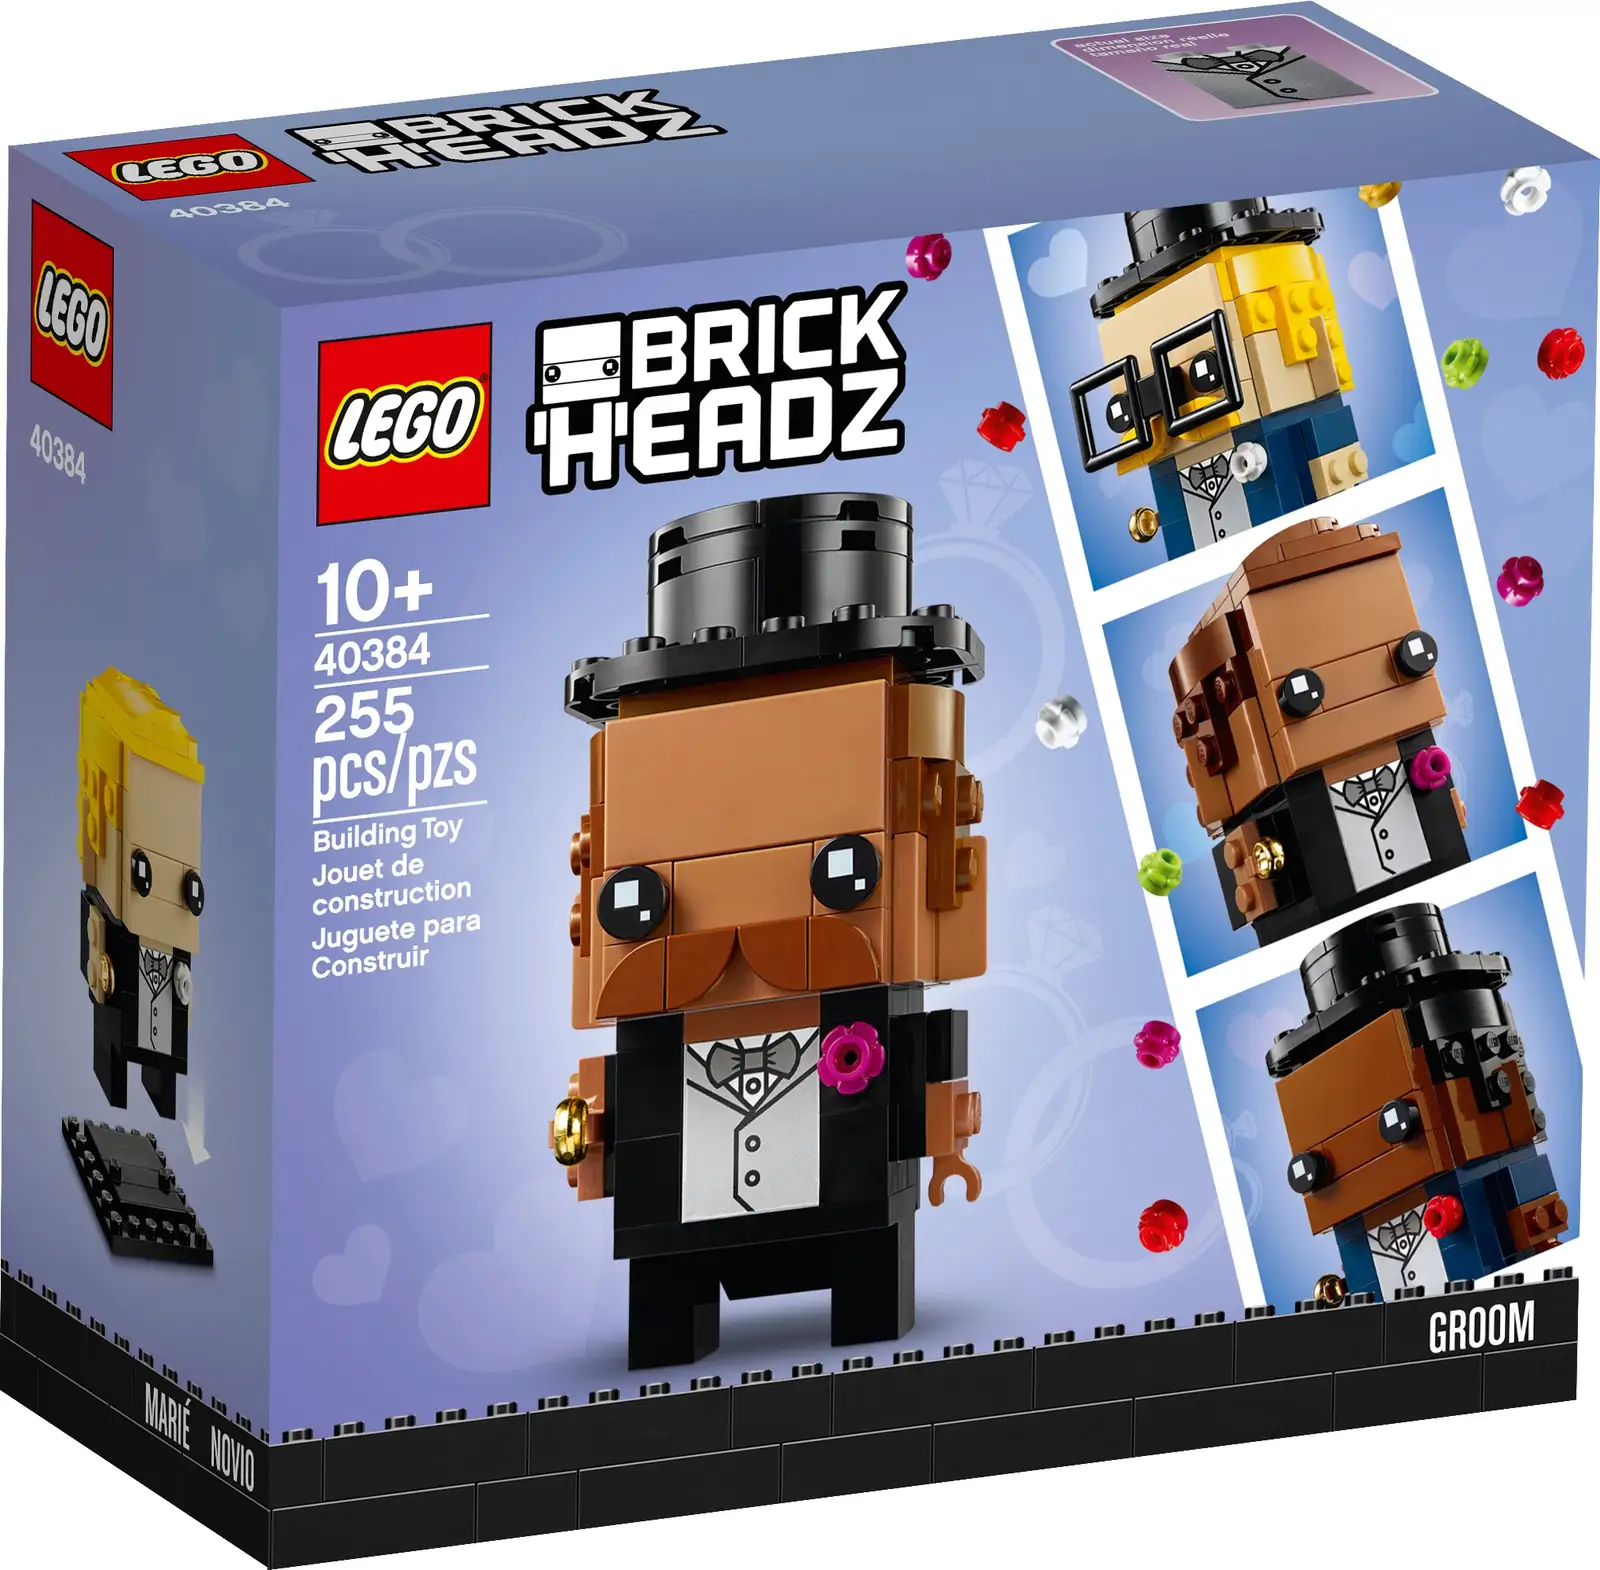 Celebrate a friend’s, family member’s or your own upcoming marriage with a LEGO® BrickHeadz™ Wedding Groom (40384) building kit. The fun model comes with a pair of glasses, hat, suit decorations, a ring and other optional pieces to personalize the facial expression, hair and skin color. With at least 11 possible looks, there's plenty of creative construction to enjoy before the big day! This collectible LEGO® BrickHeadz™ buildable model of a smartly dressed gentleman with customizable facial expression, hair and skin color makes a great gift for a groom on or before his wedding day. Simple and fun to build, the set is suitable for anyone aged 10 and up. With 255 pieces and standing more than 3” (8cm) tall, this buildable Wedding Groom looks great combined with the corresponding LEGO® BrickHeadz™ Wedding Bride (40383) or in pairs!